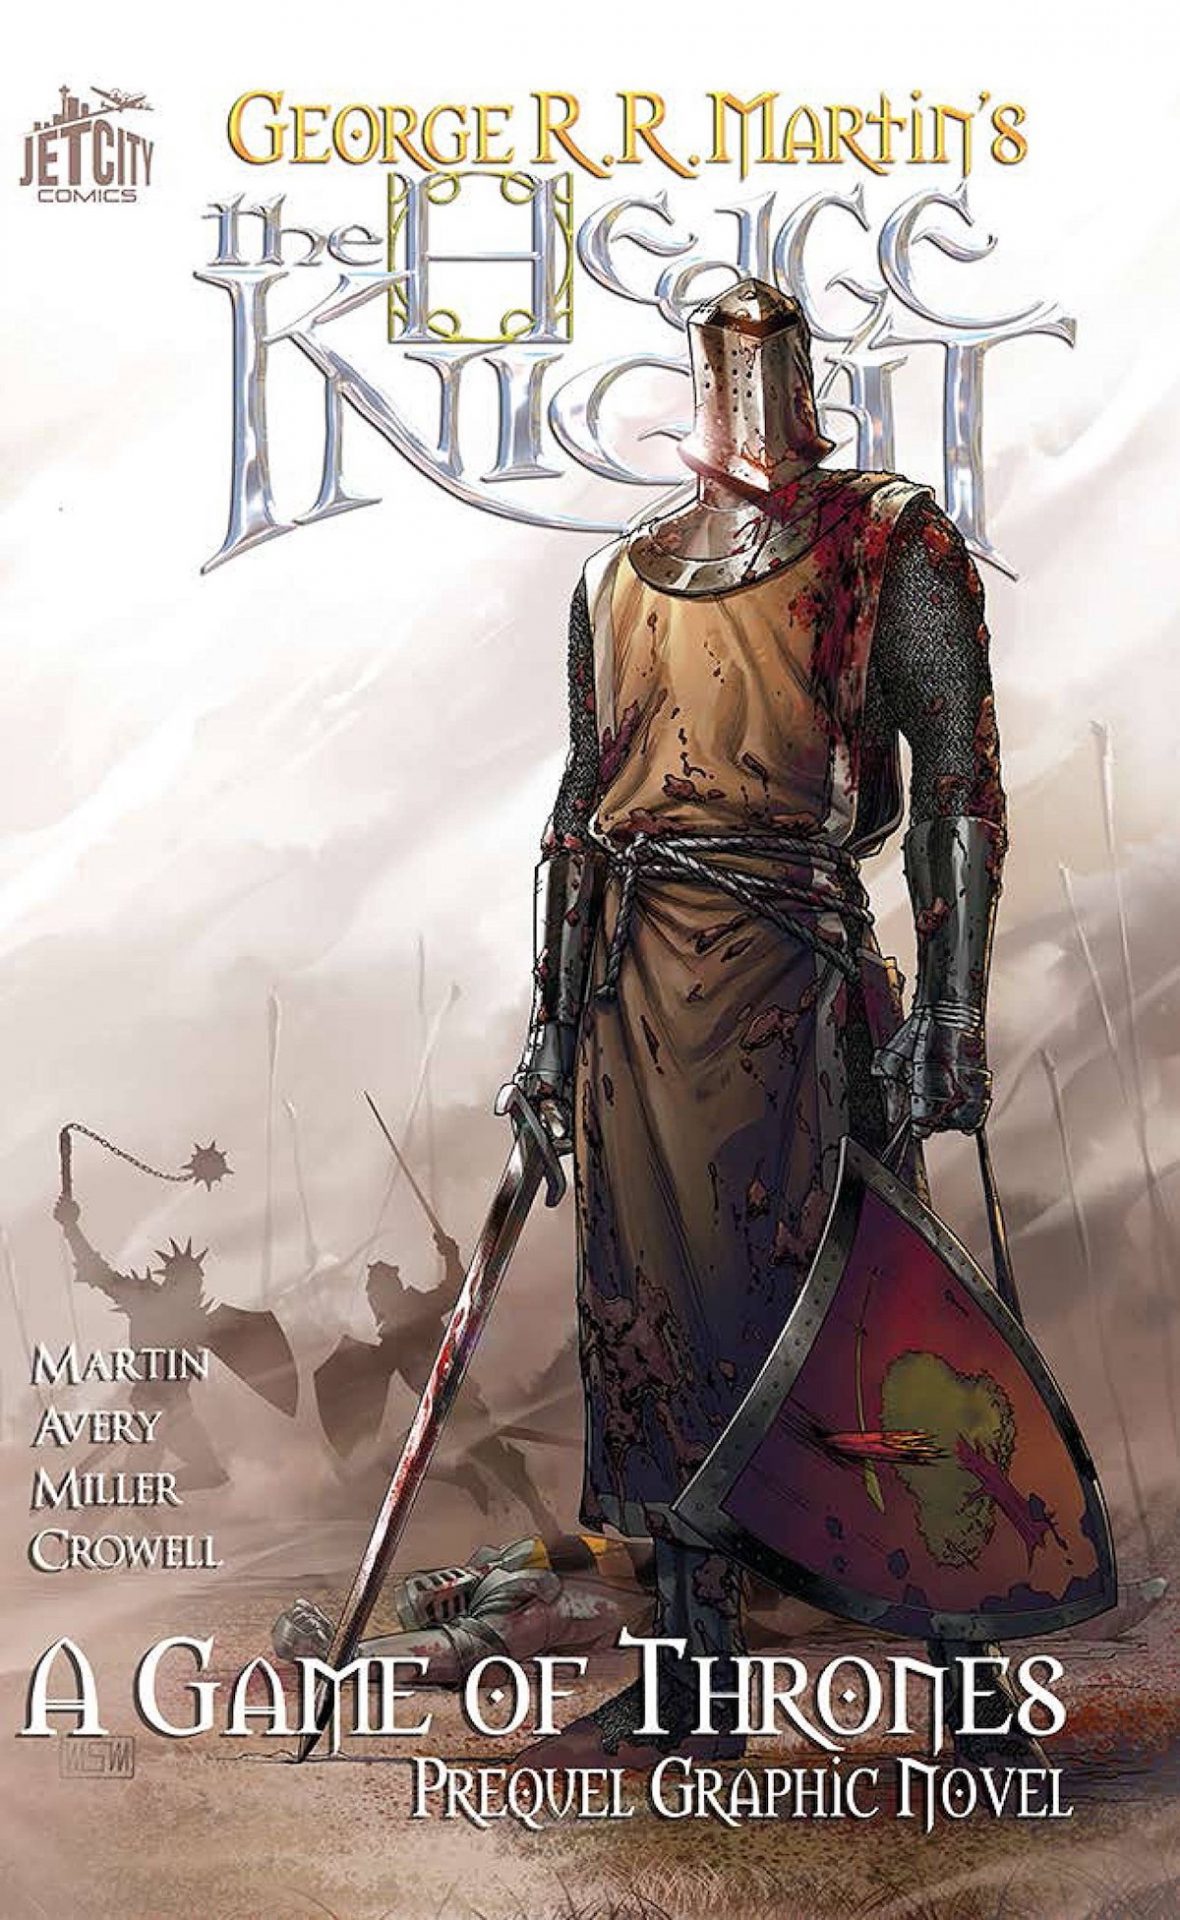 A tall knight on the cover of the graphic novel adaptation of The Hedge Knight